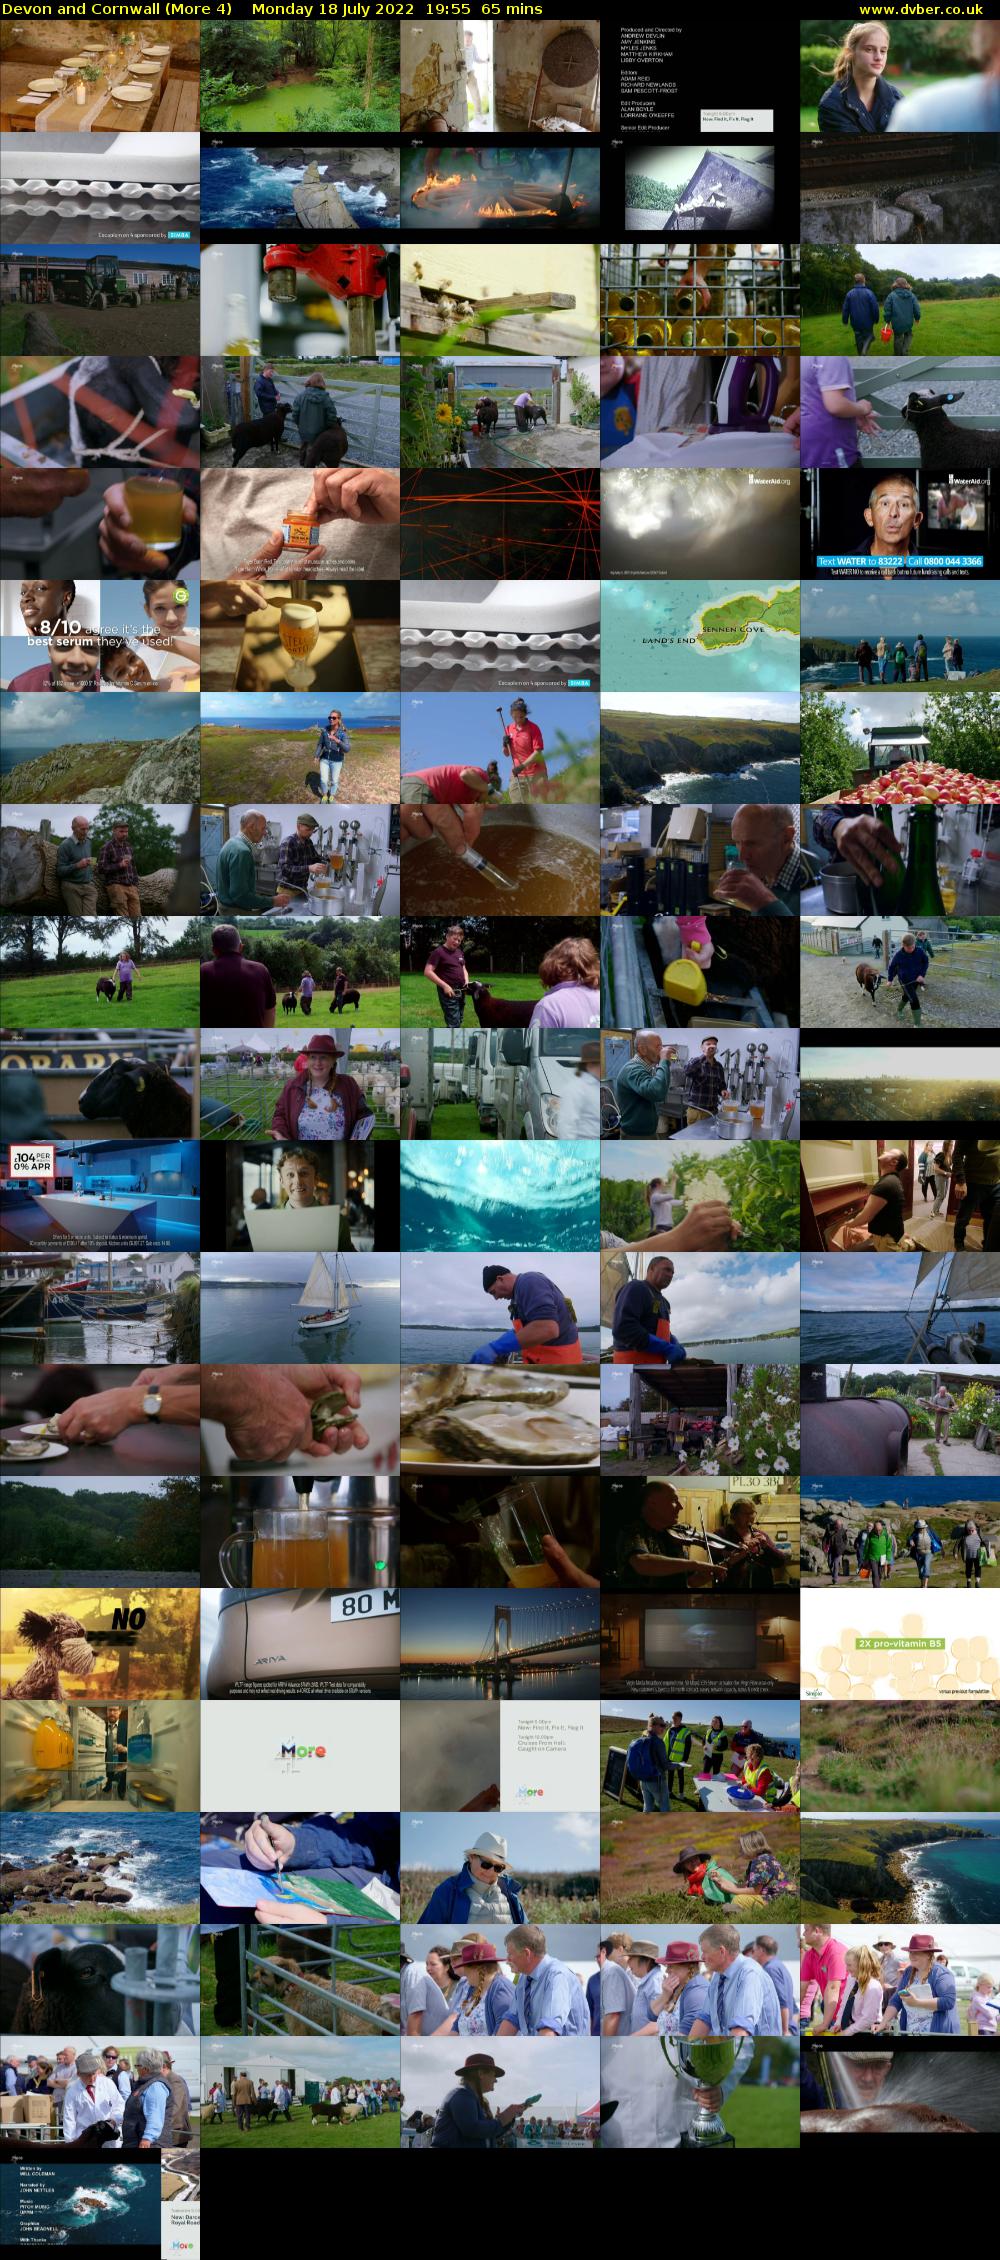 Devon and Cornwall (More 4) Monday 18 July 2022 19:55 - 21:00